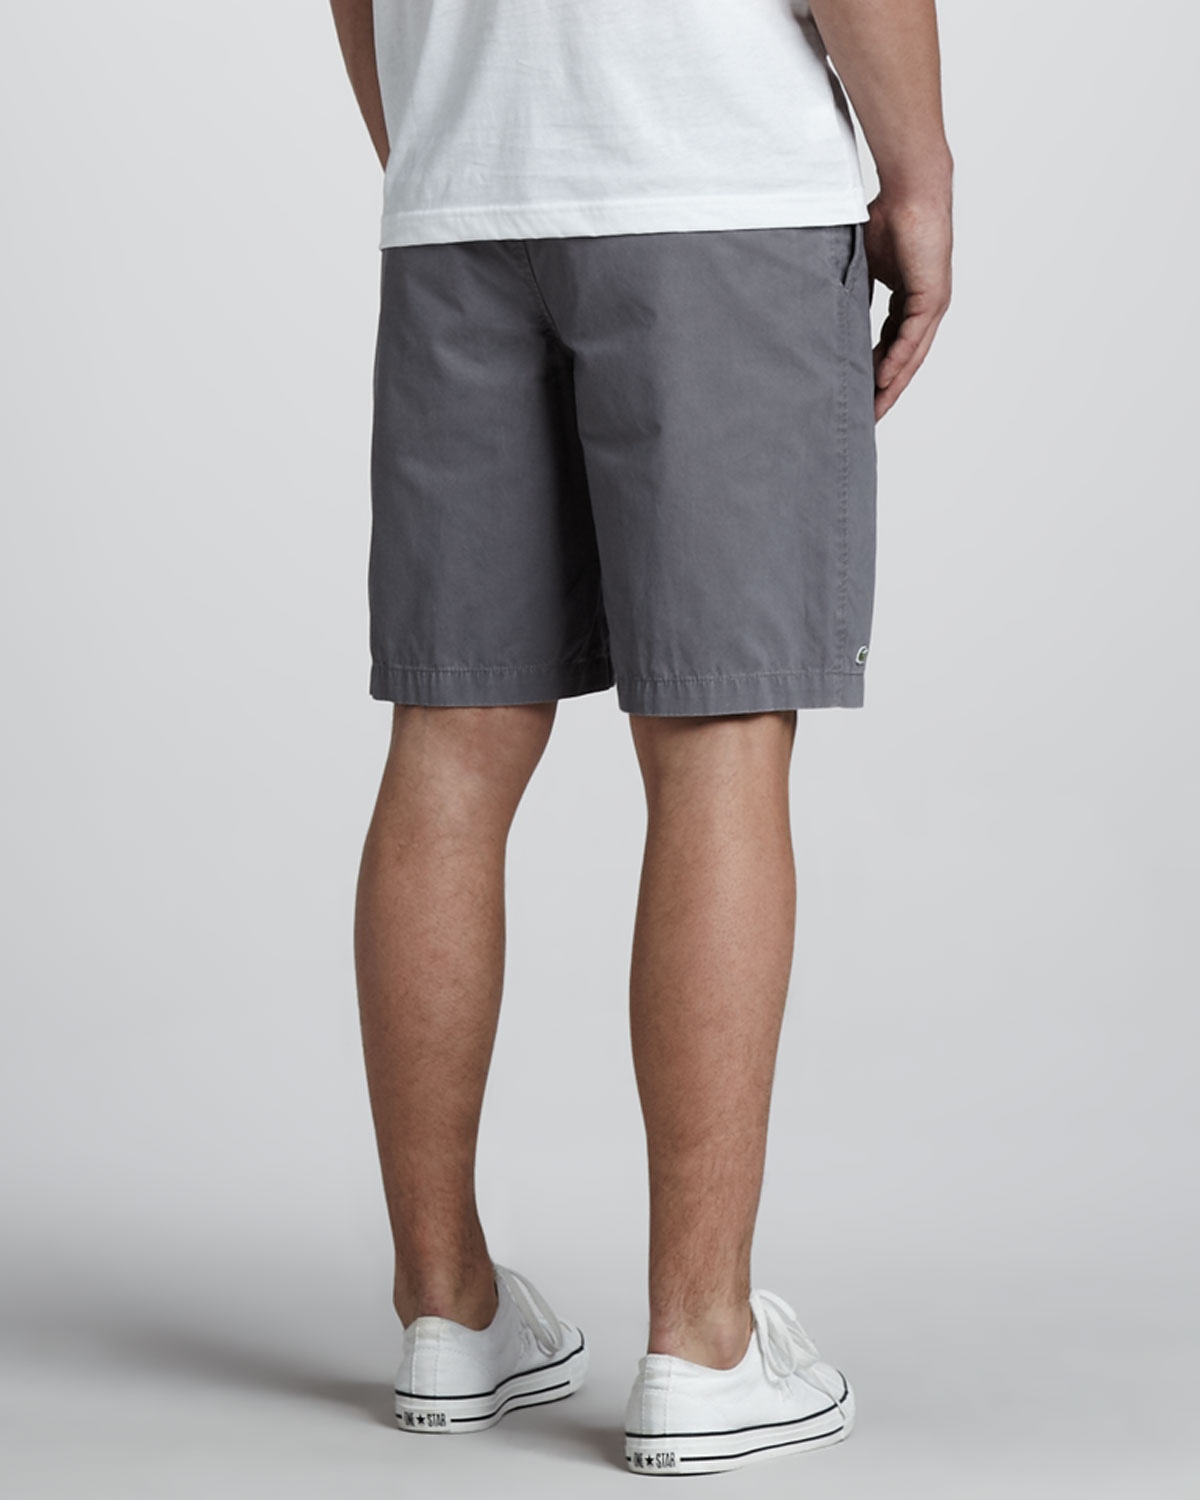 Lyst - Lacoste Classic Bermuda Shorts in Gray for Men